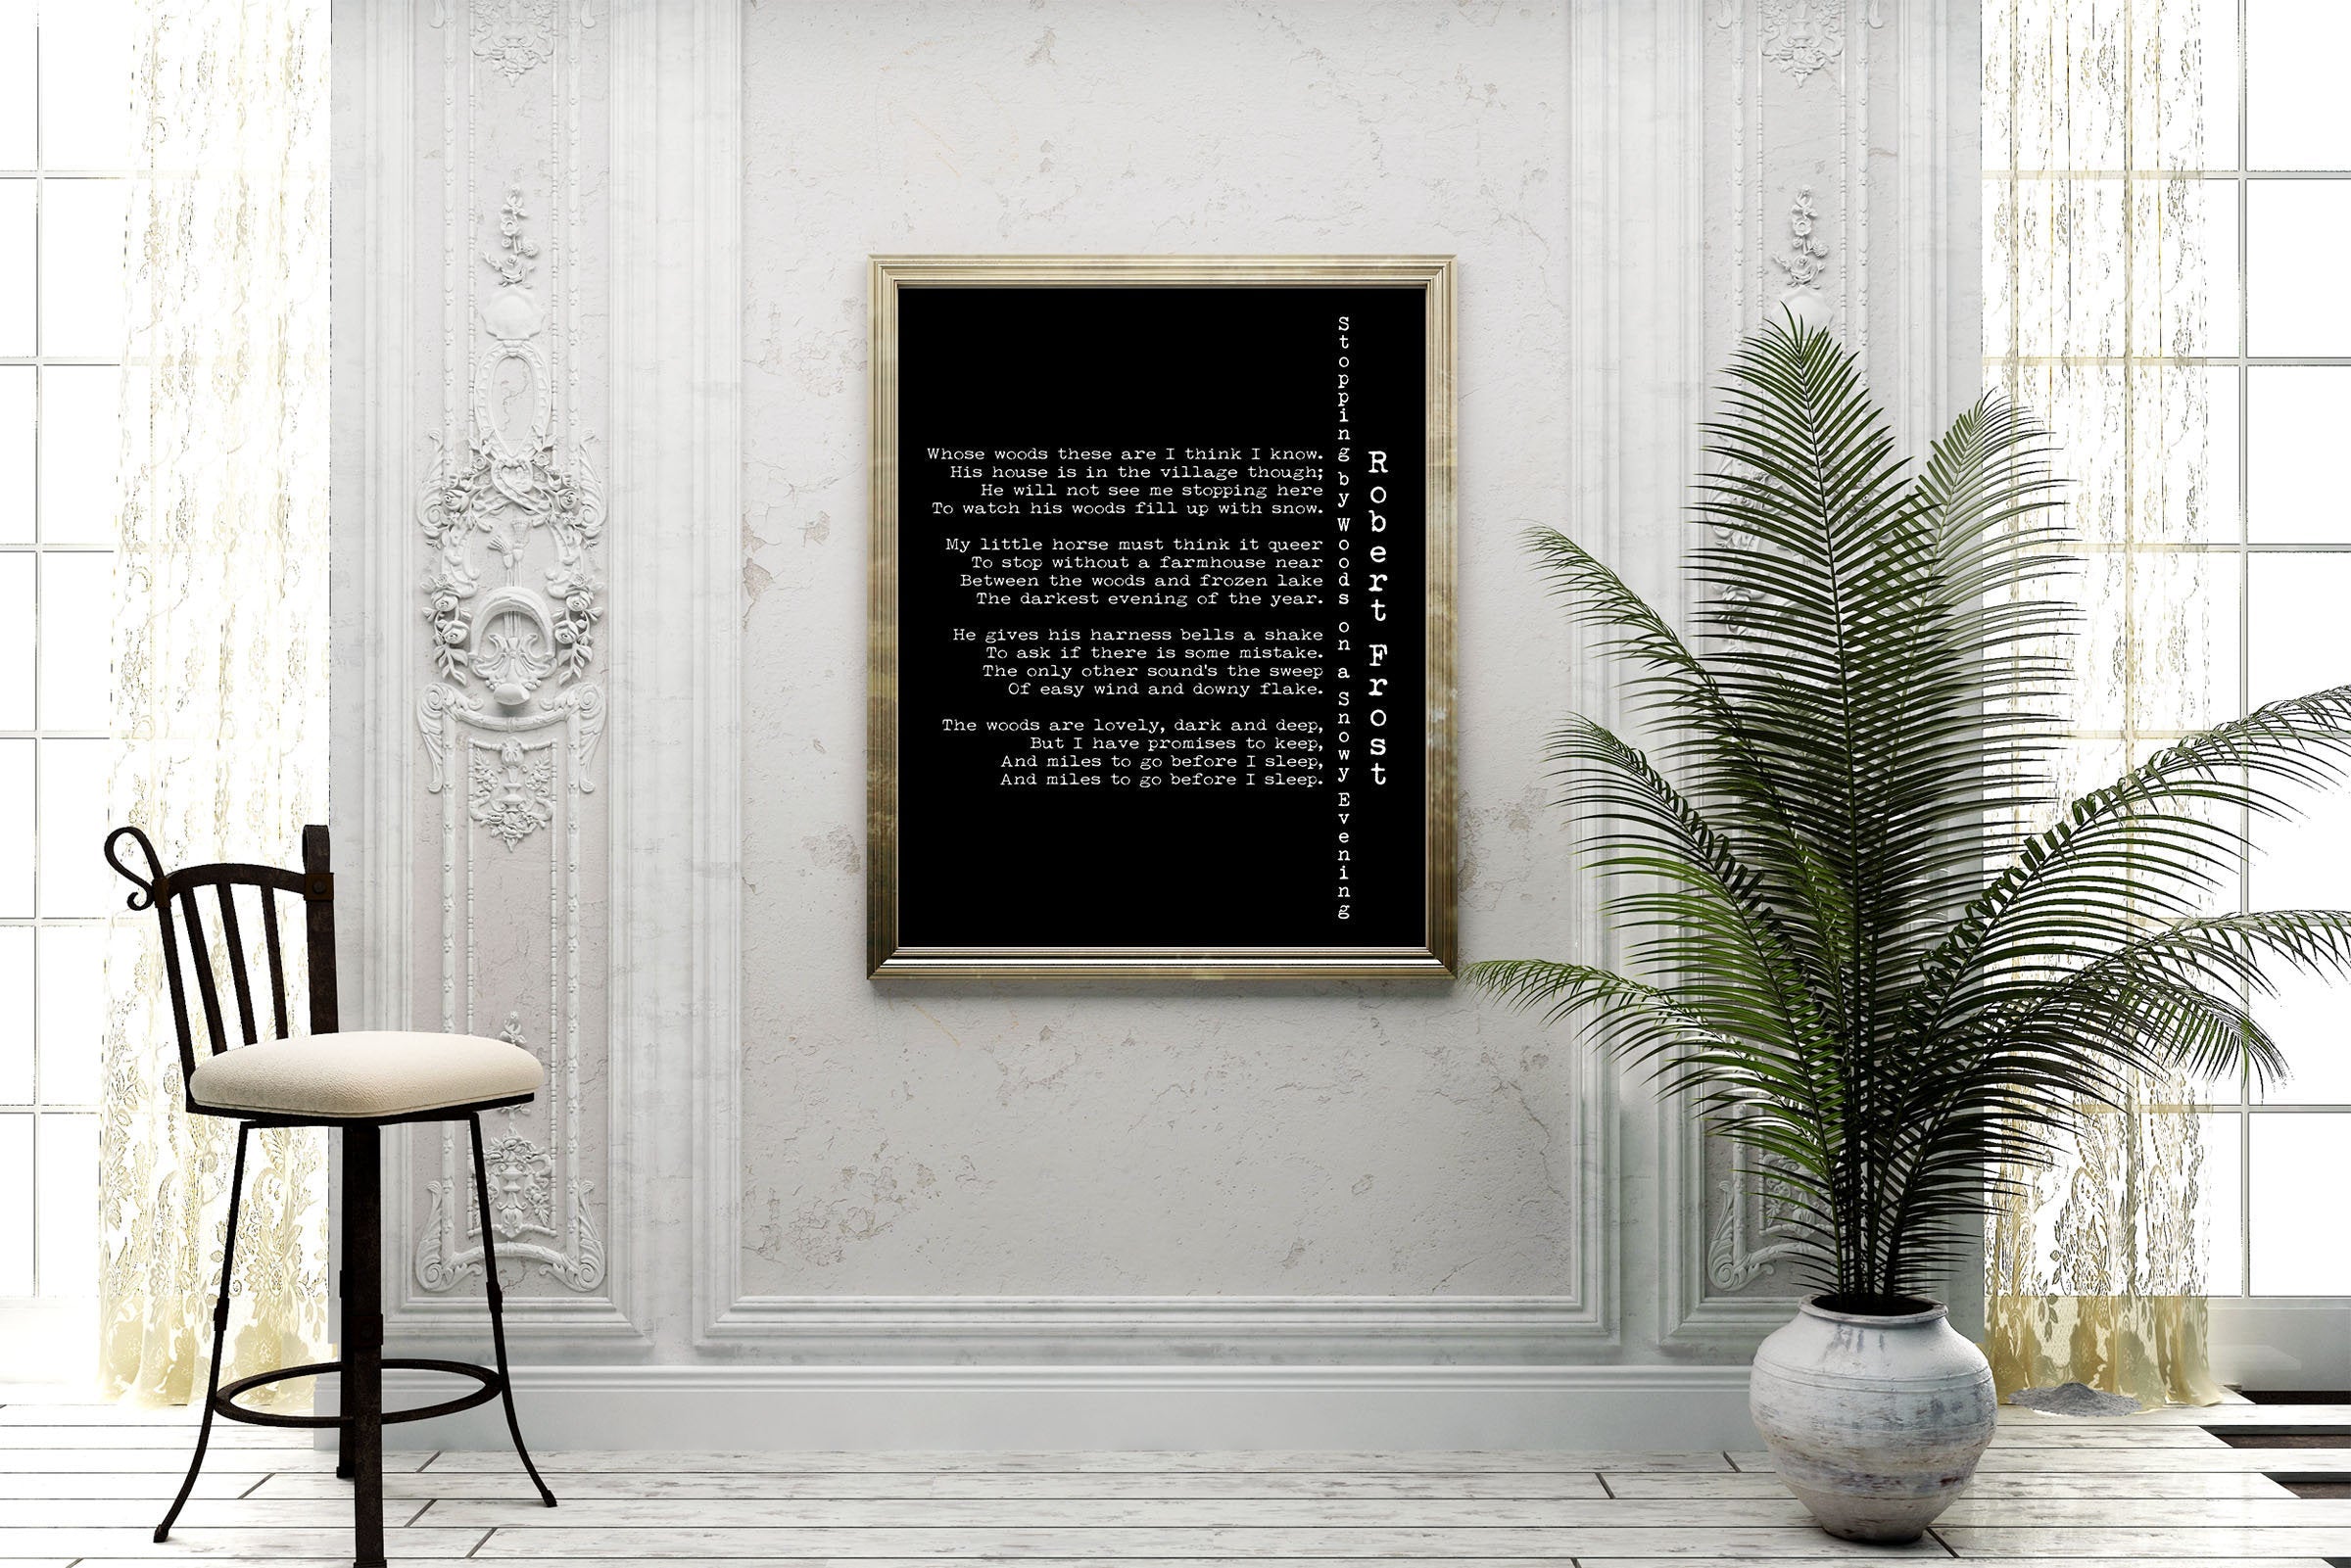 Robert Frost Poem Print, Miles to go Before I sleep Poetry Poster Unframed in Black & White for Home Wall Decor, Woods on a Snowy Evening - BookQuoteDecor